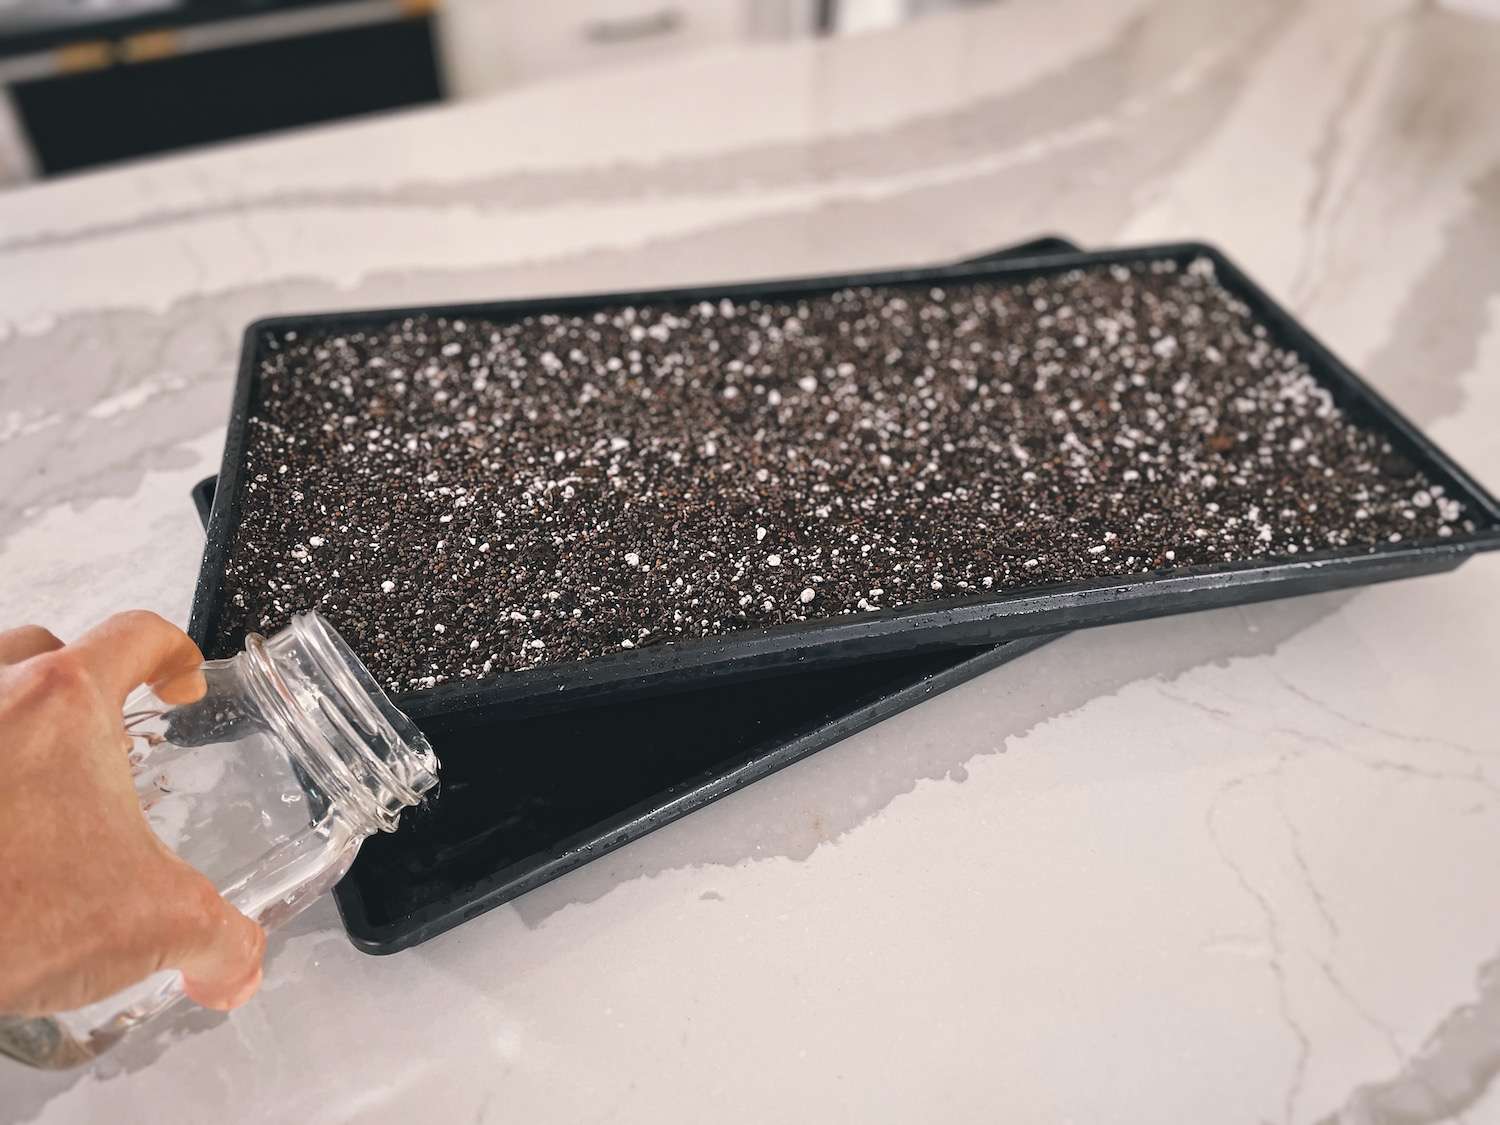 A 1020 growing tray filled with soil and broccoli microgreens seeds. A glass of water is being poured into the bottom tray.